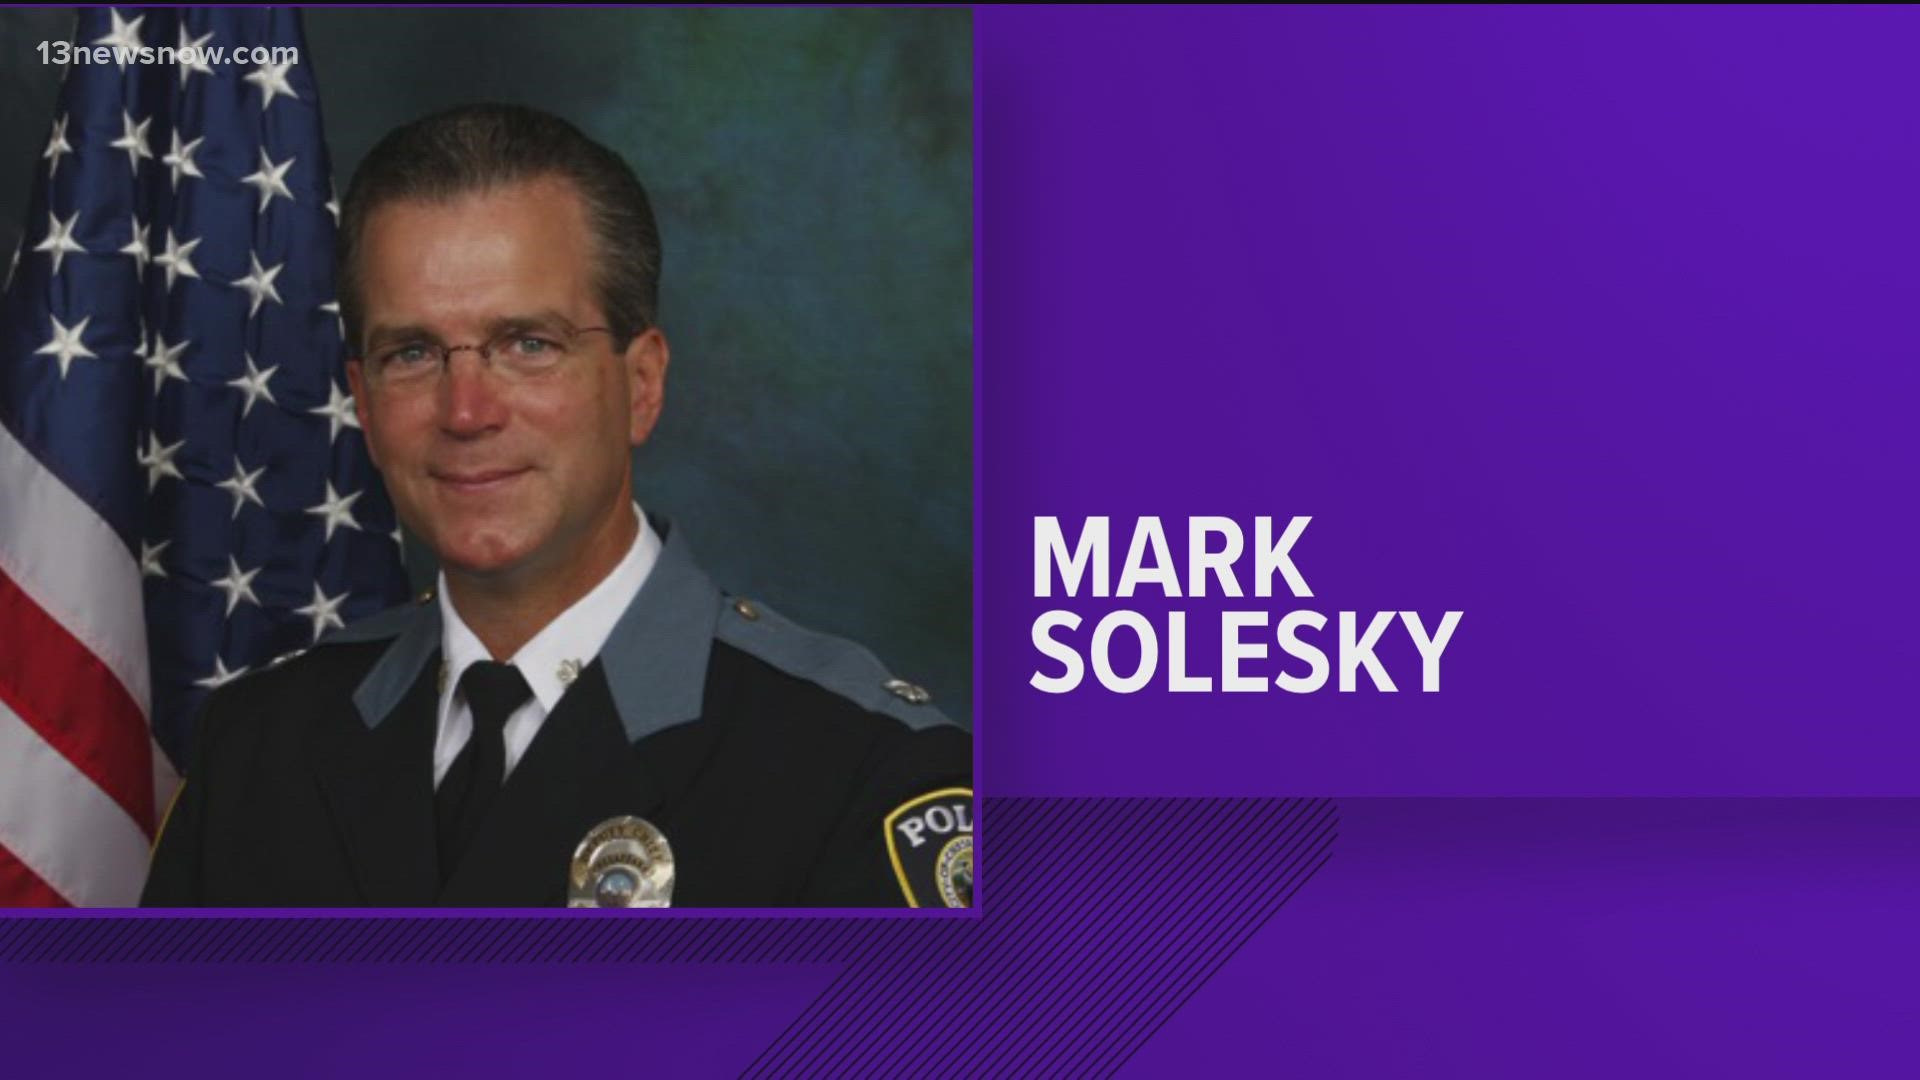 Solesky brings over 35 years of service to the city, having served as acting chief since Kelvin Wright's retirement and, before that, deputy police chief.